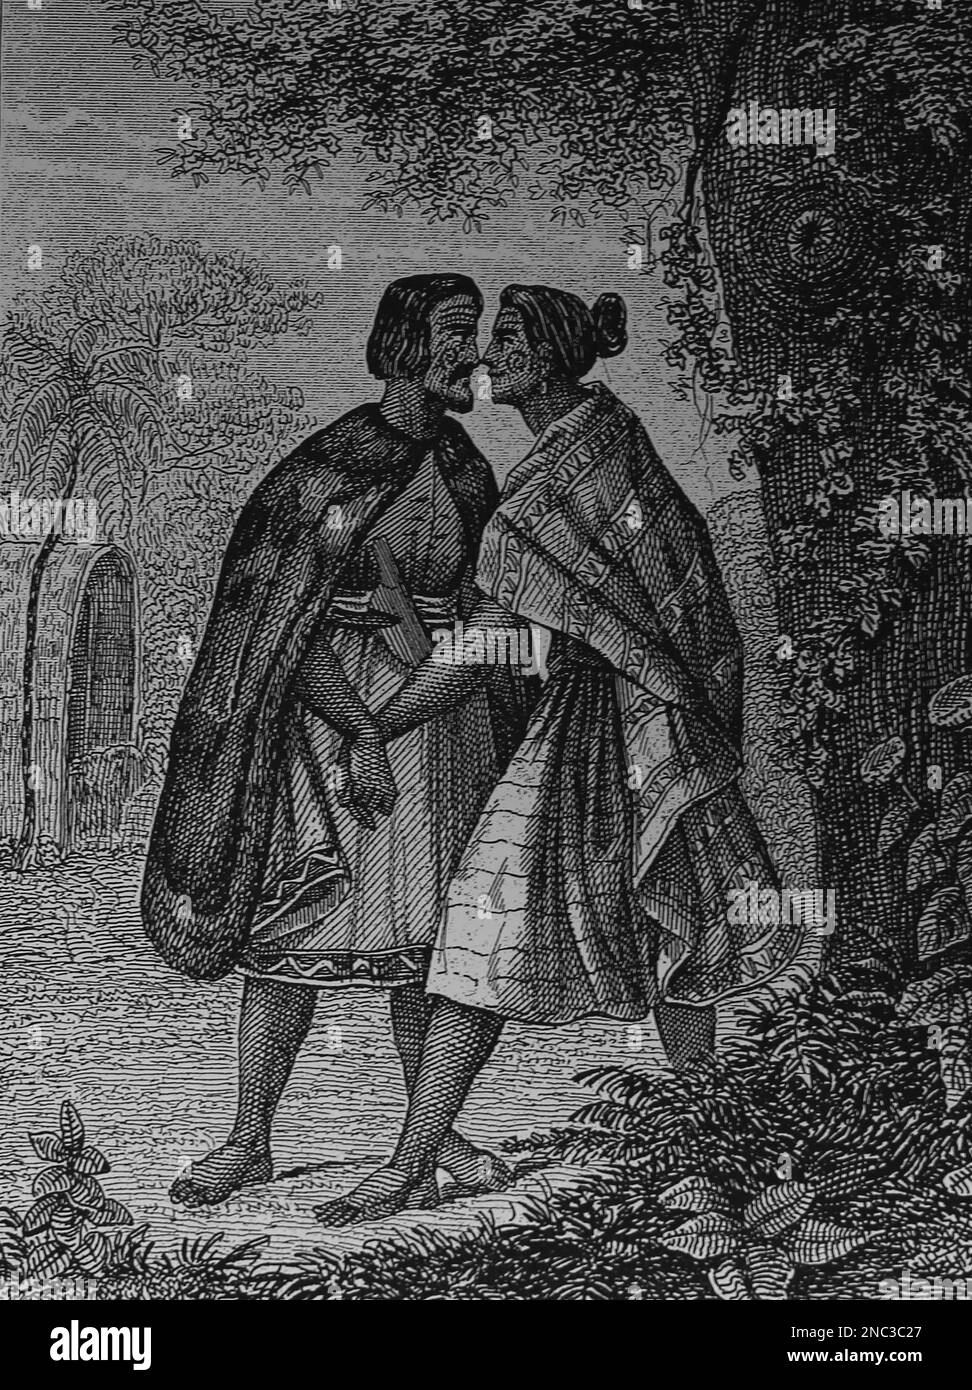 New Zealand. The traditional Maori greeting, the hongi. Pressing noses. Engraving. 19th century. Stock Photo